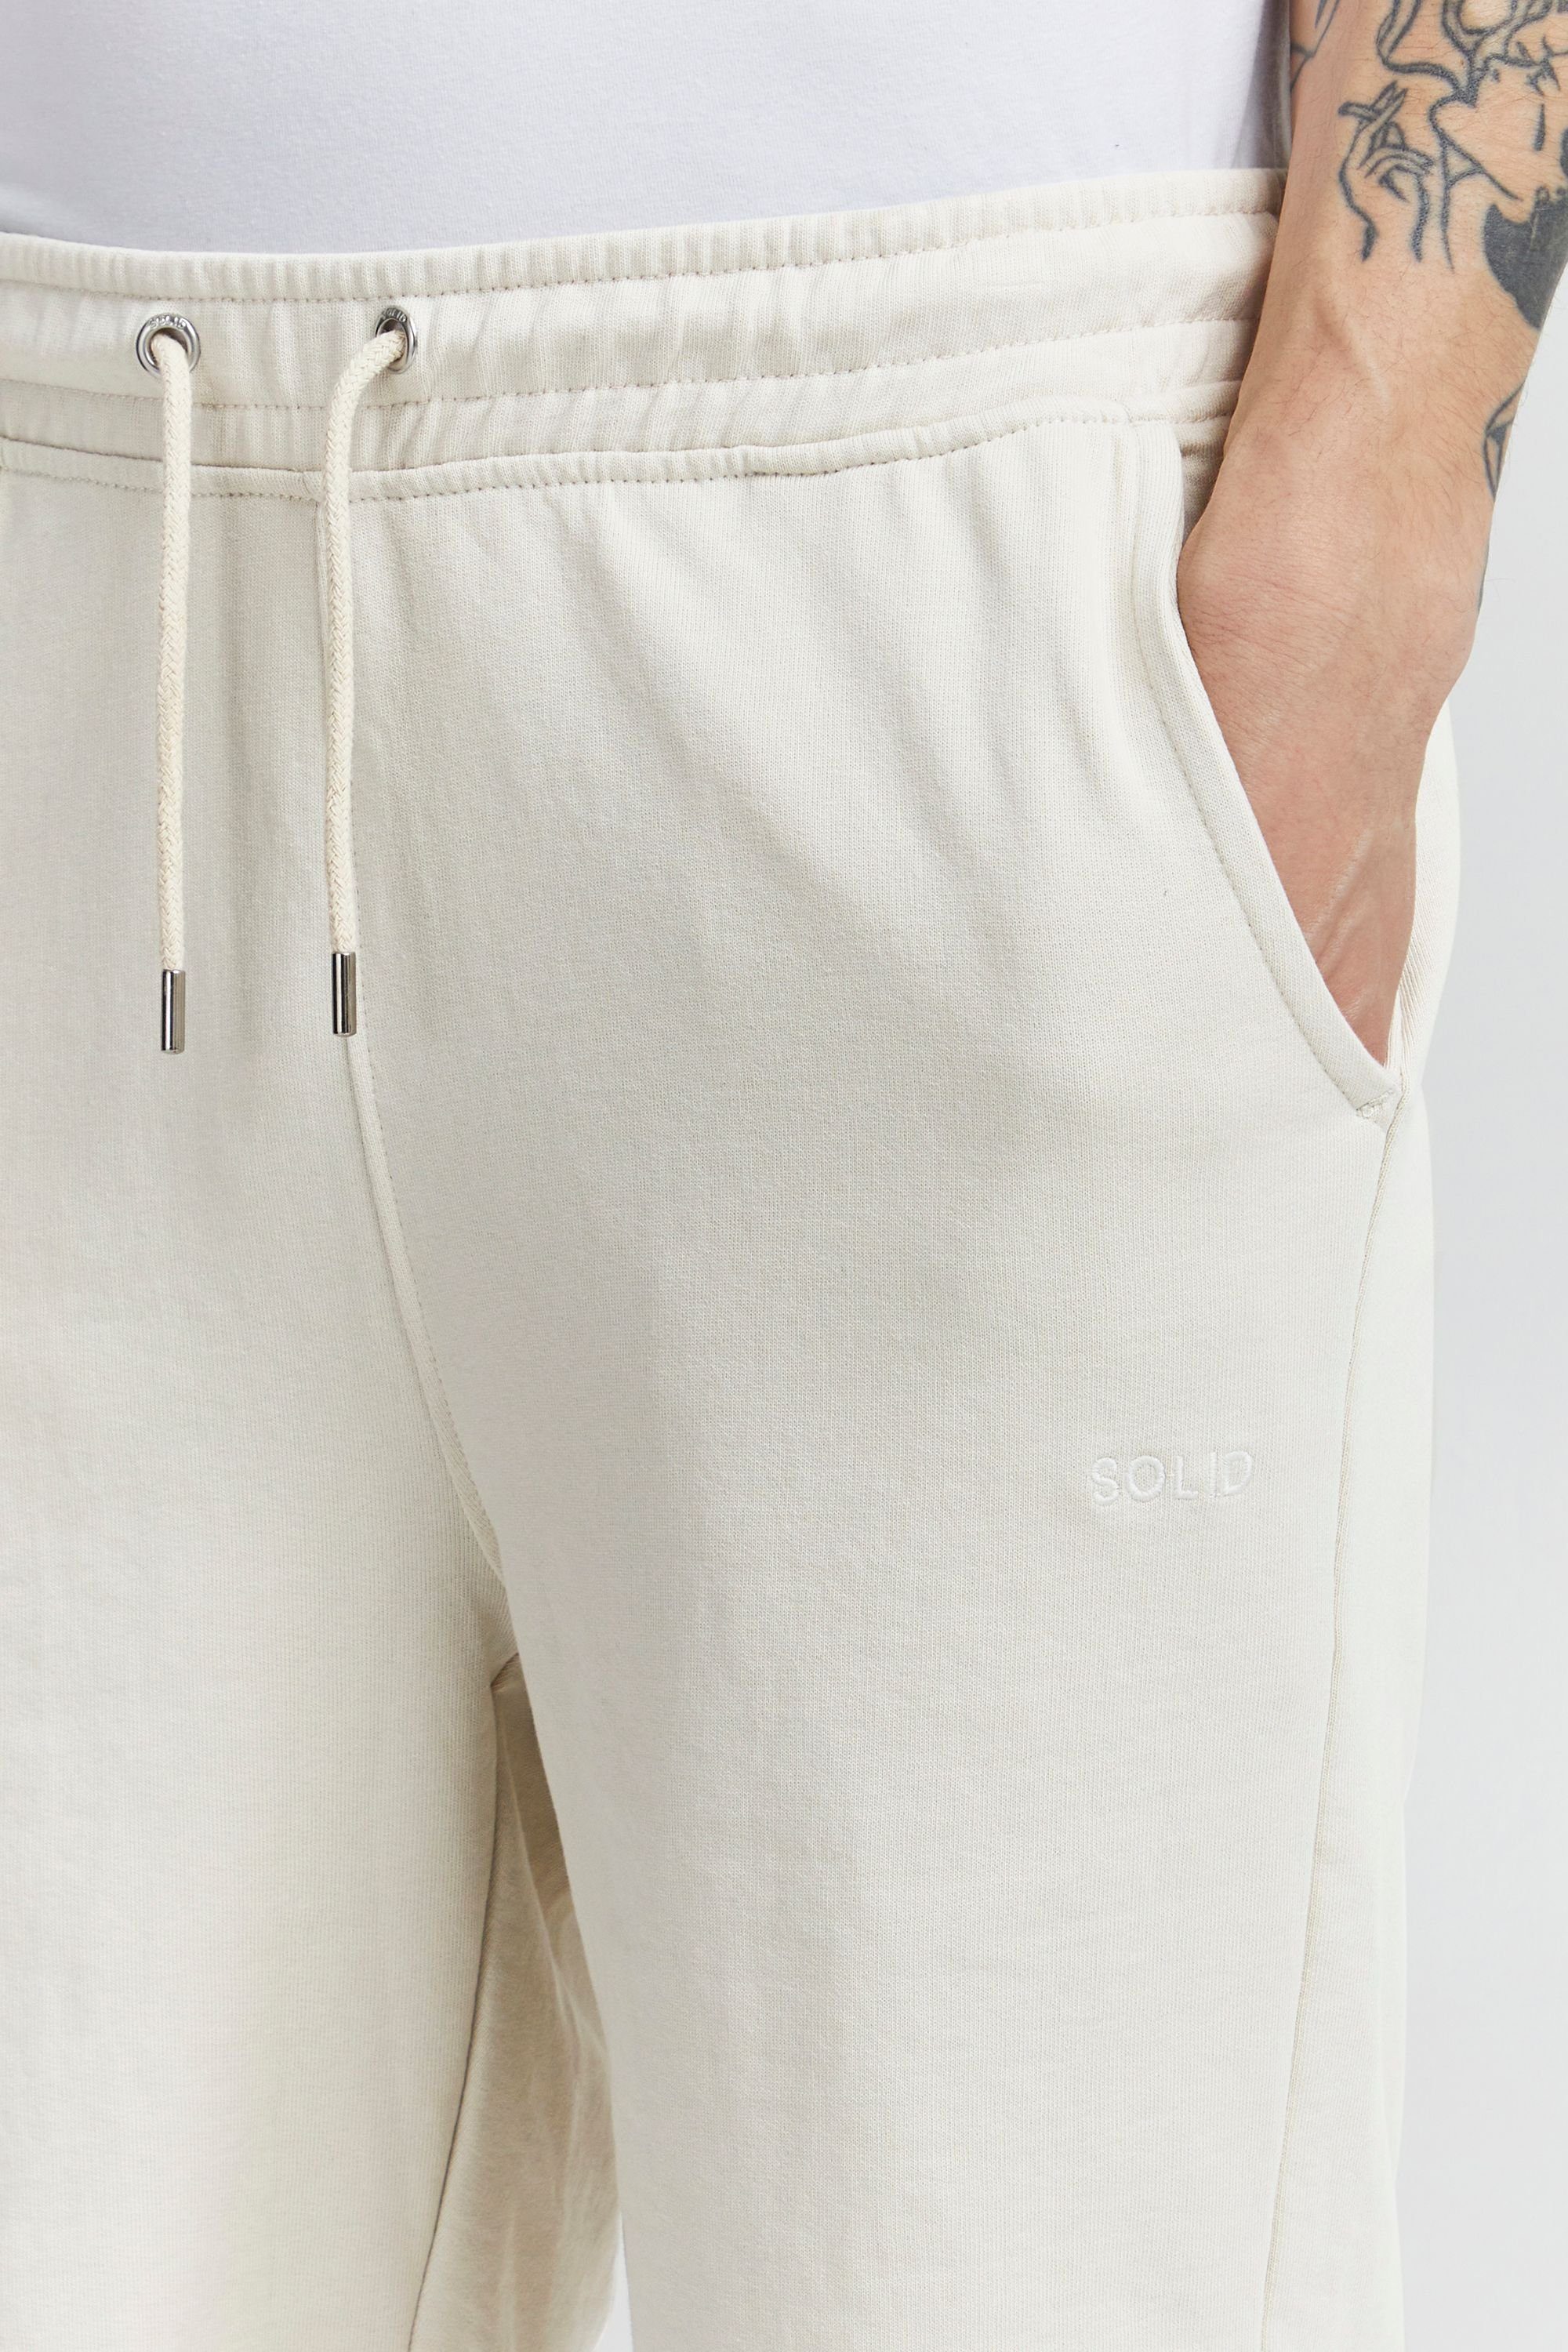 Solid Relaxshorts SDBrenden SHO (130401) OATMEAL 21106991 